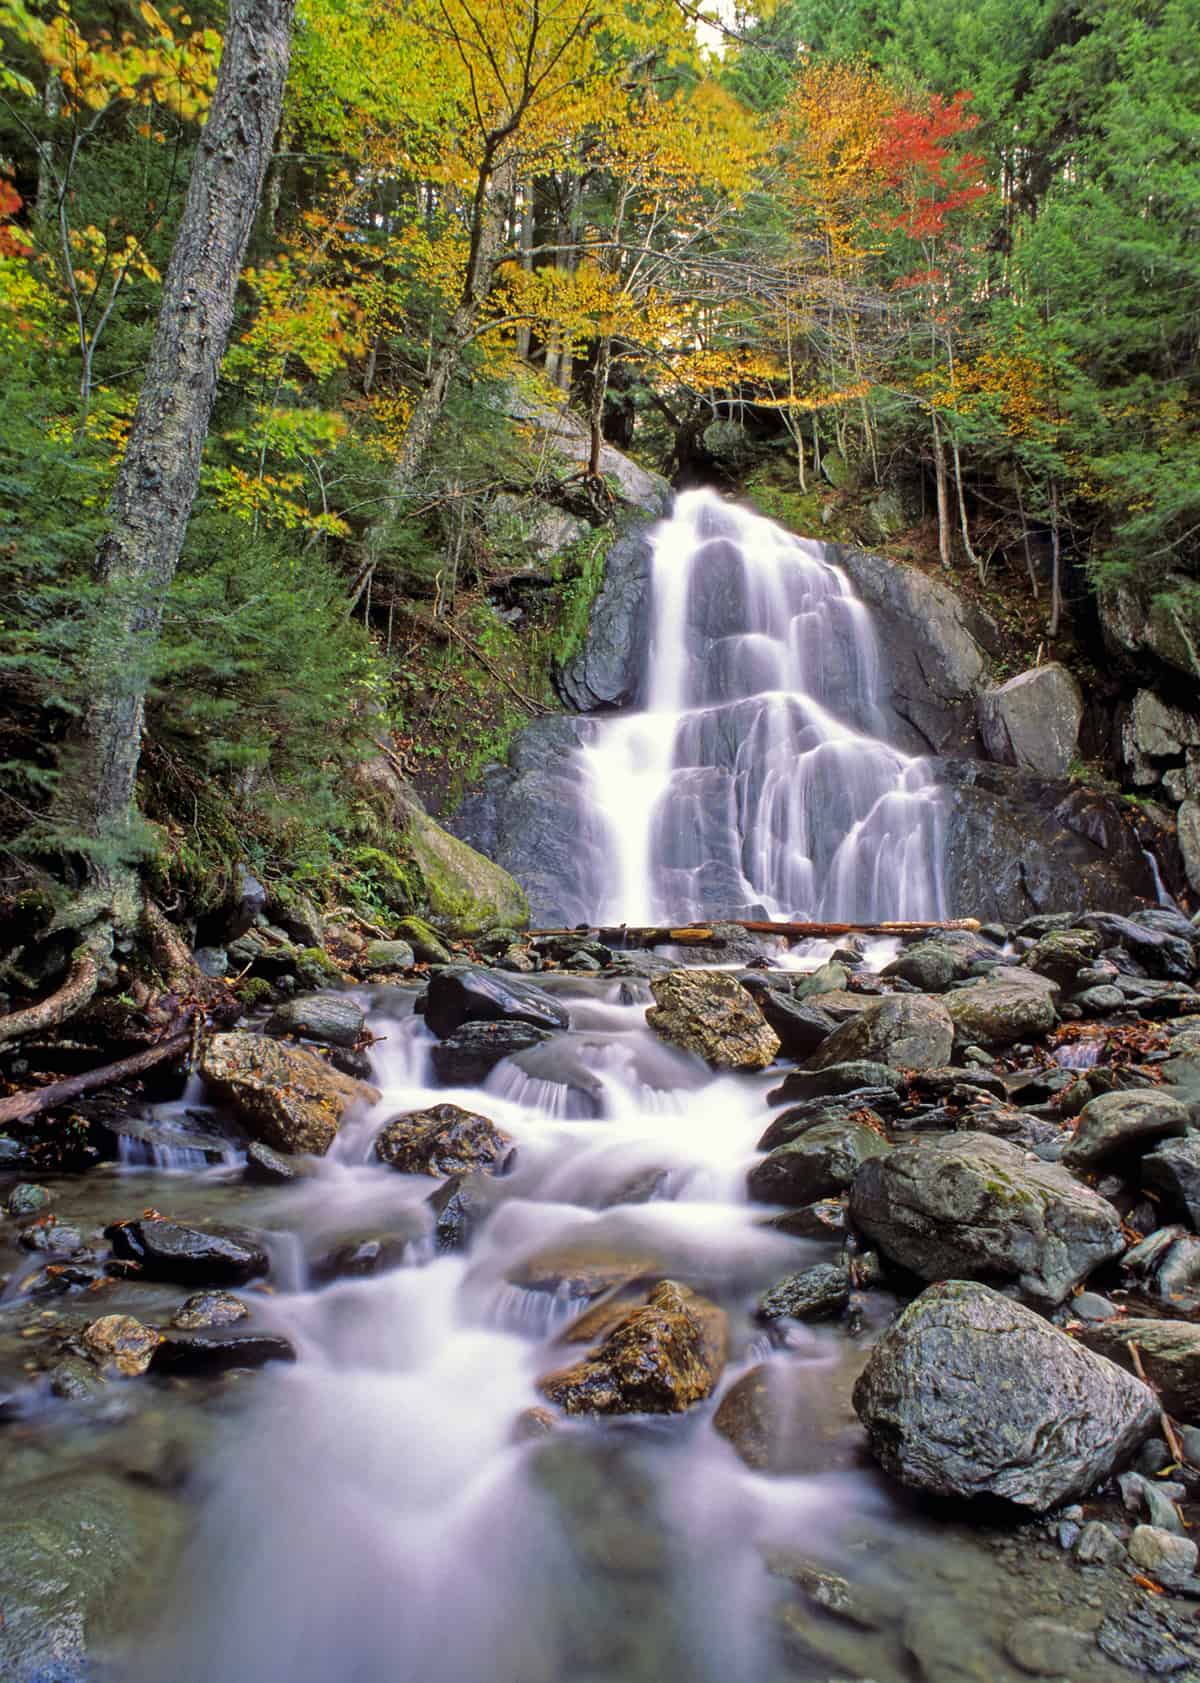 Beautiful waterfall called Moss Glen Falls in Granville VT - off Scenic Route 100